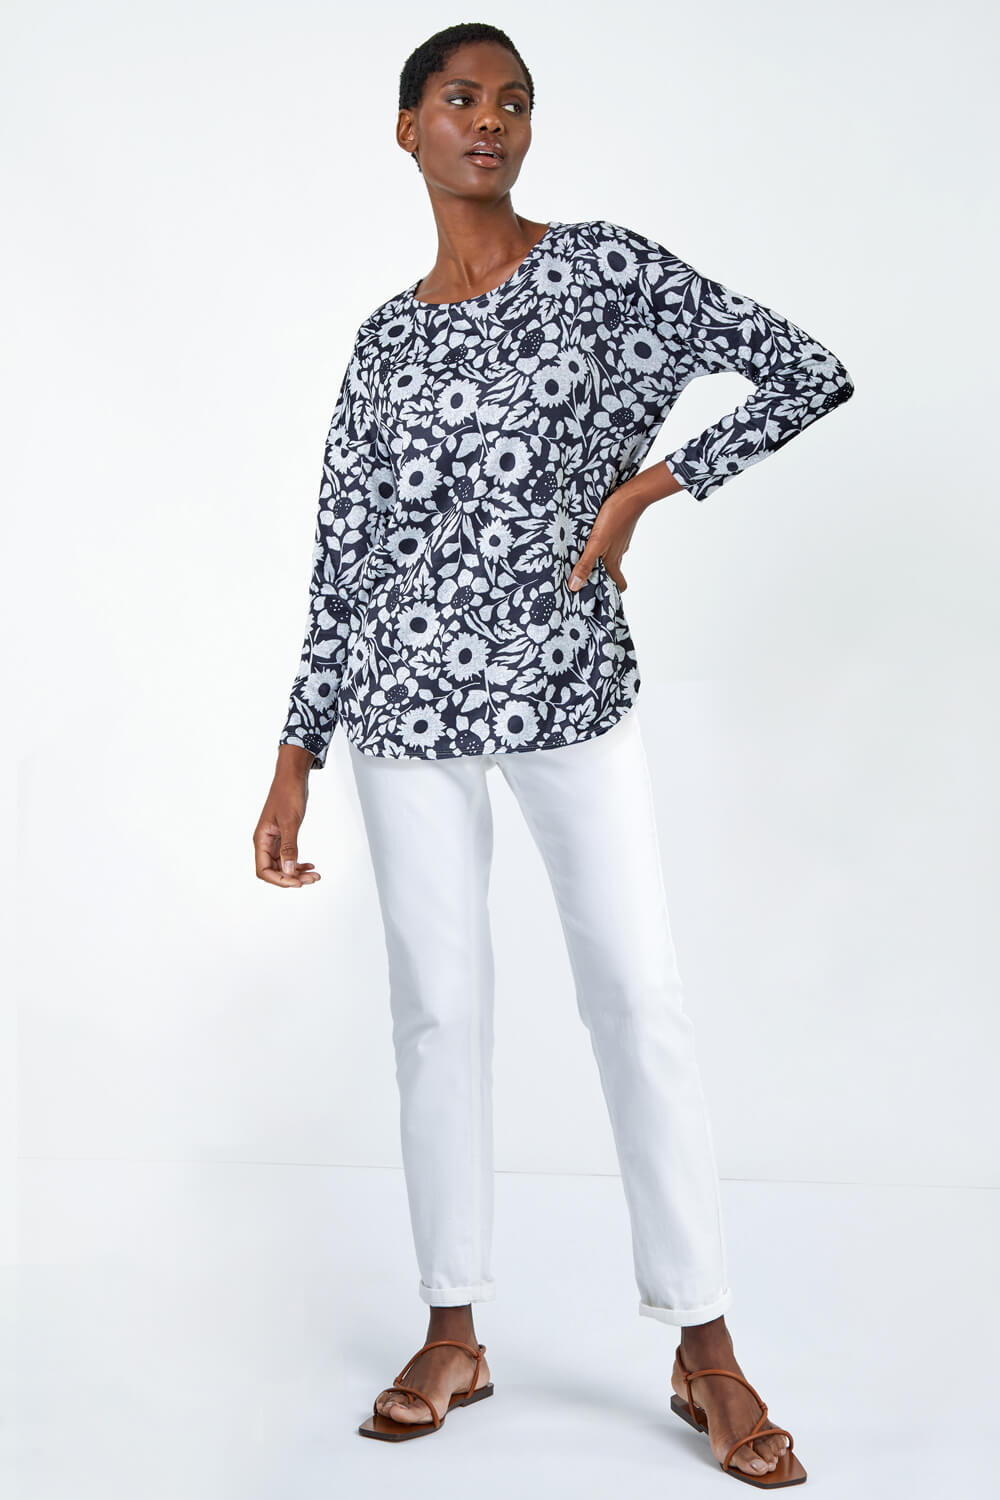 Grey Floral Print Stretch Top, Image 2 of 5